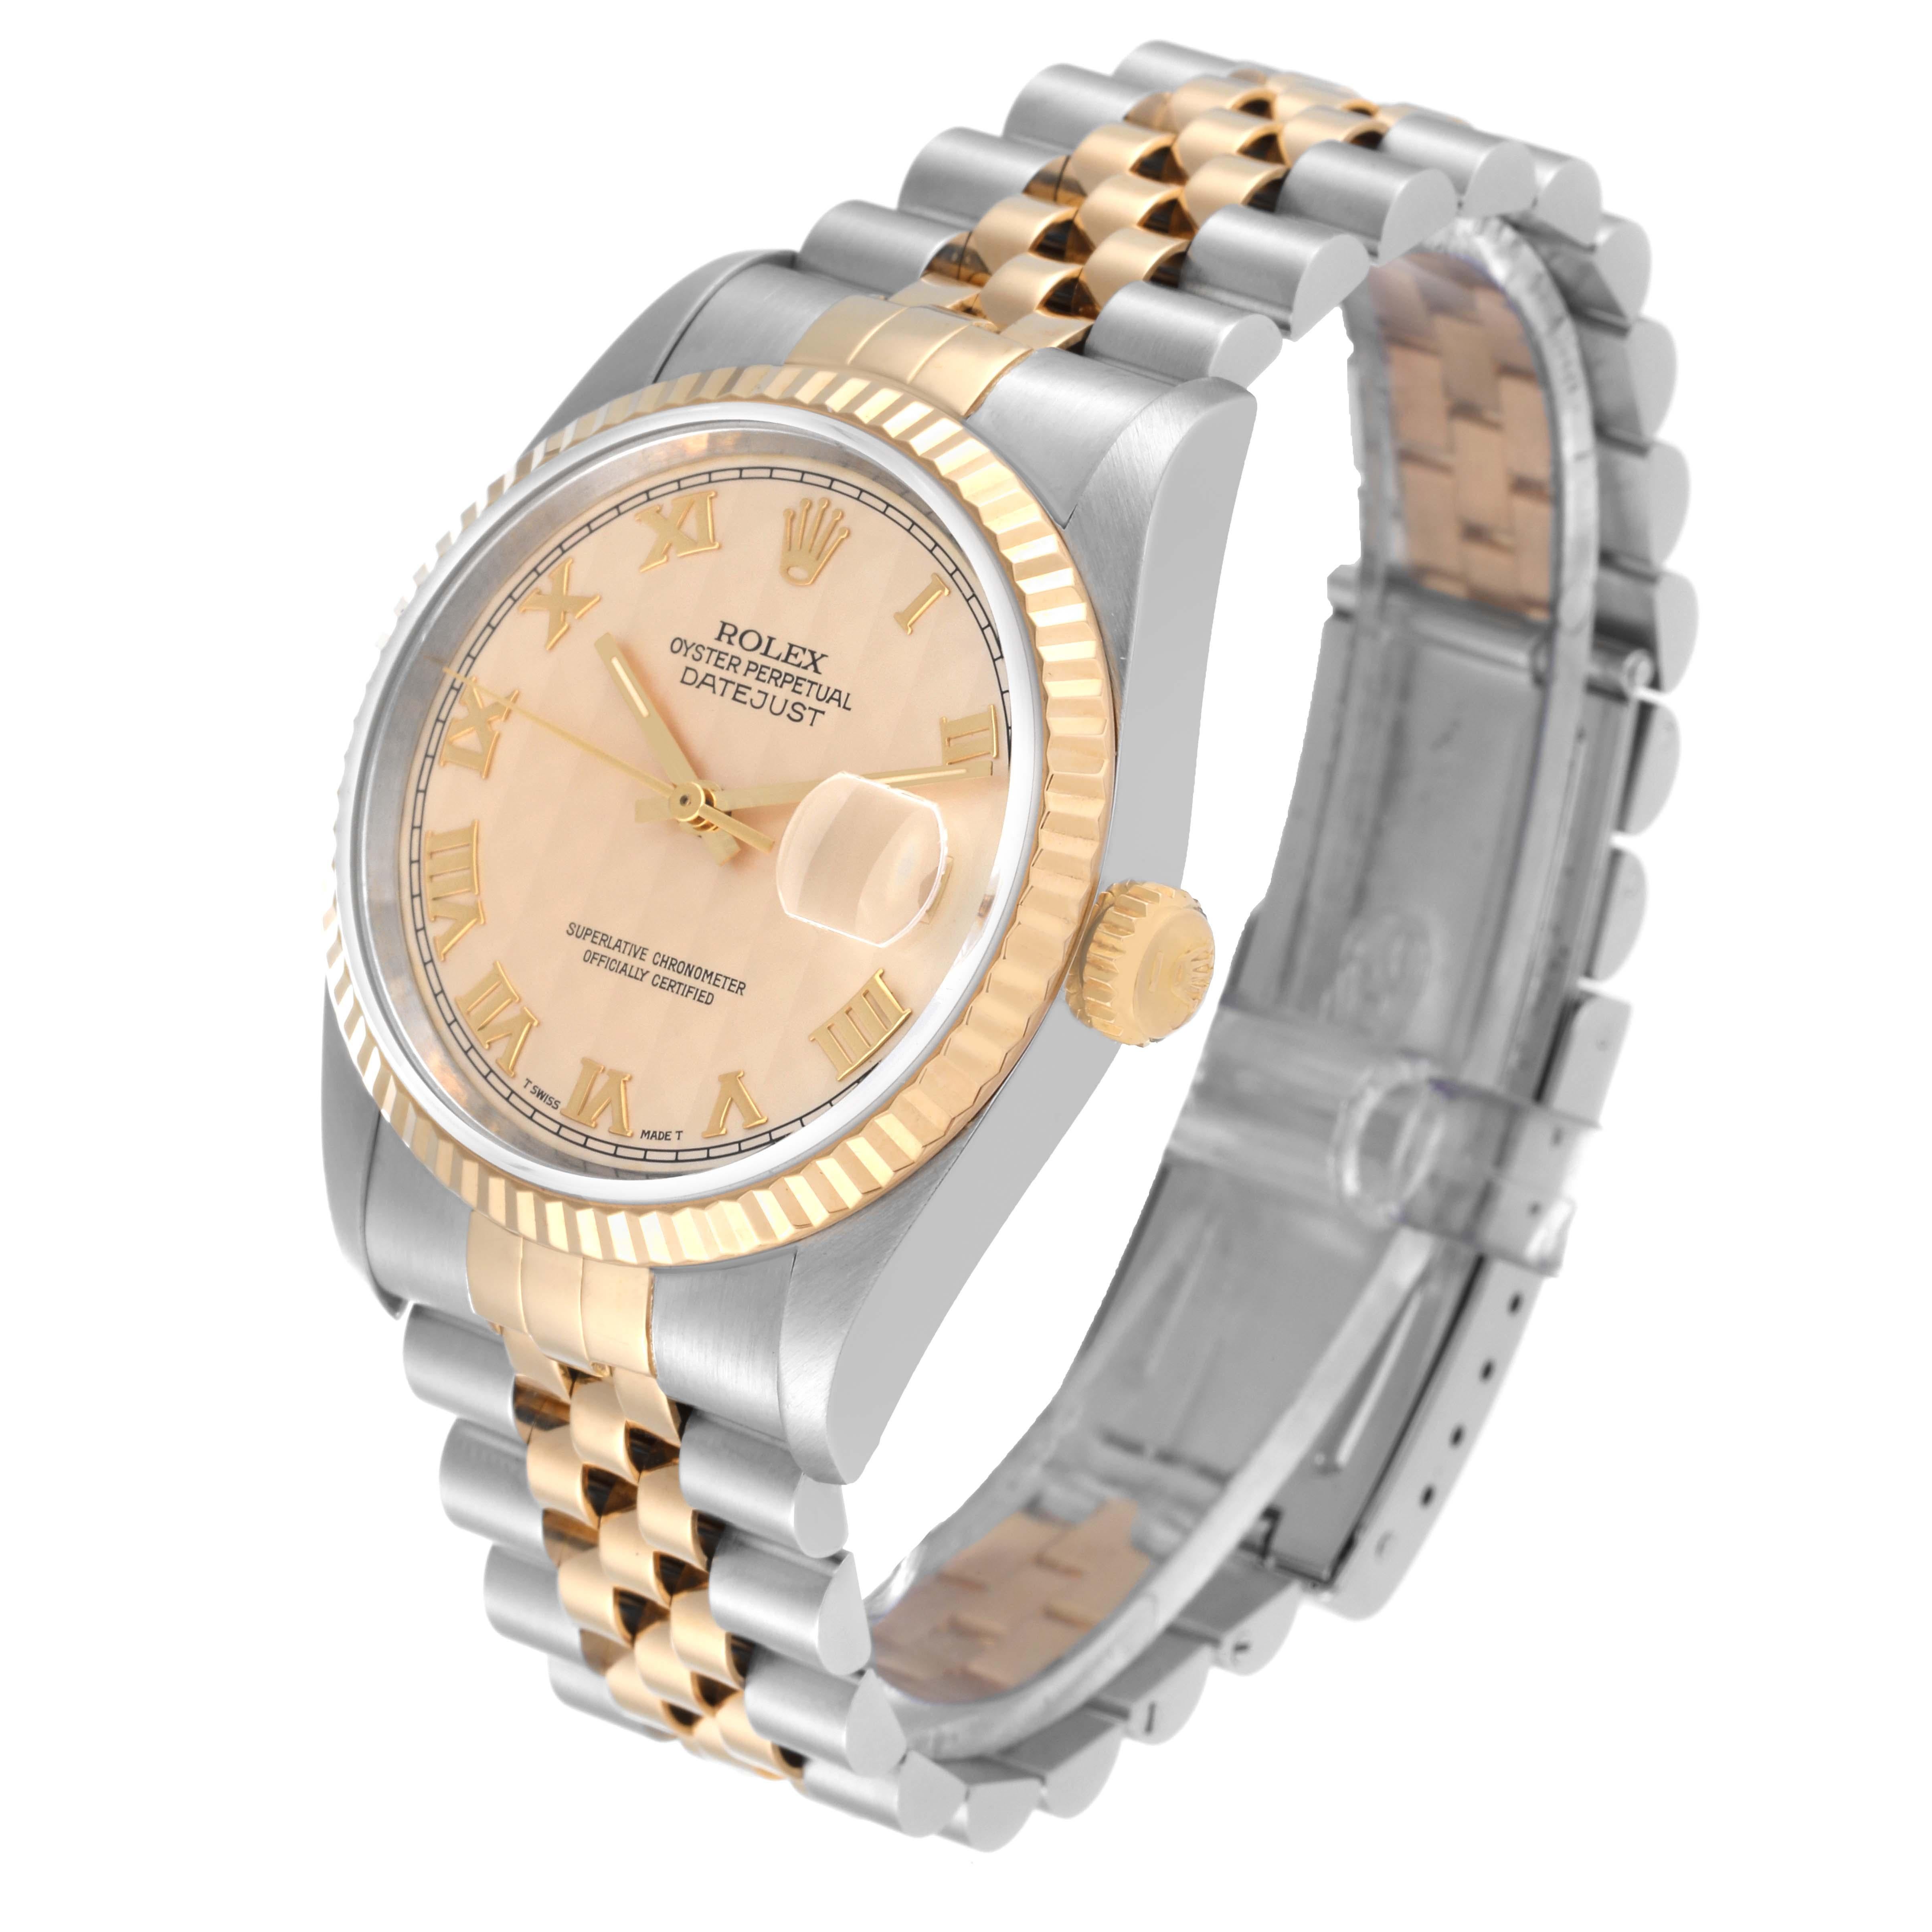 Rolex Datejust Steel Yellow Gold Champagne Pyramid Dial Mens Watch 16233 In Excellent Condition For Sale In Atlanta, GA